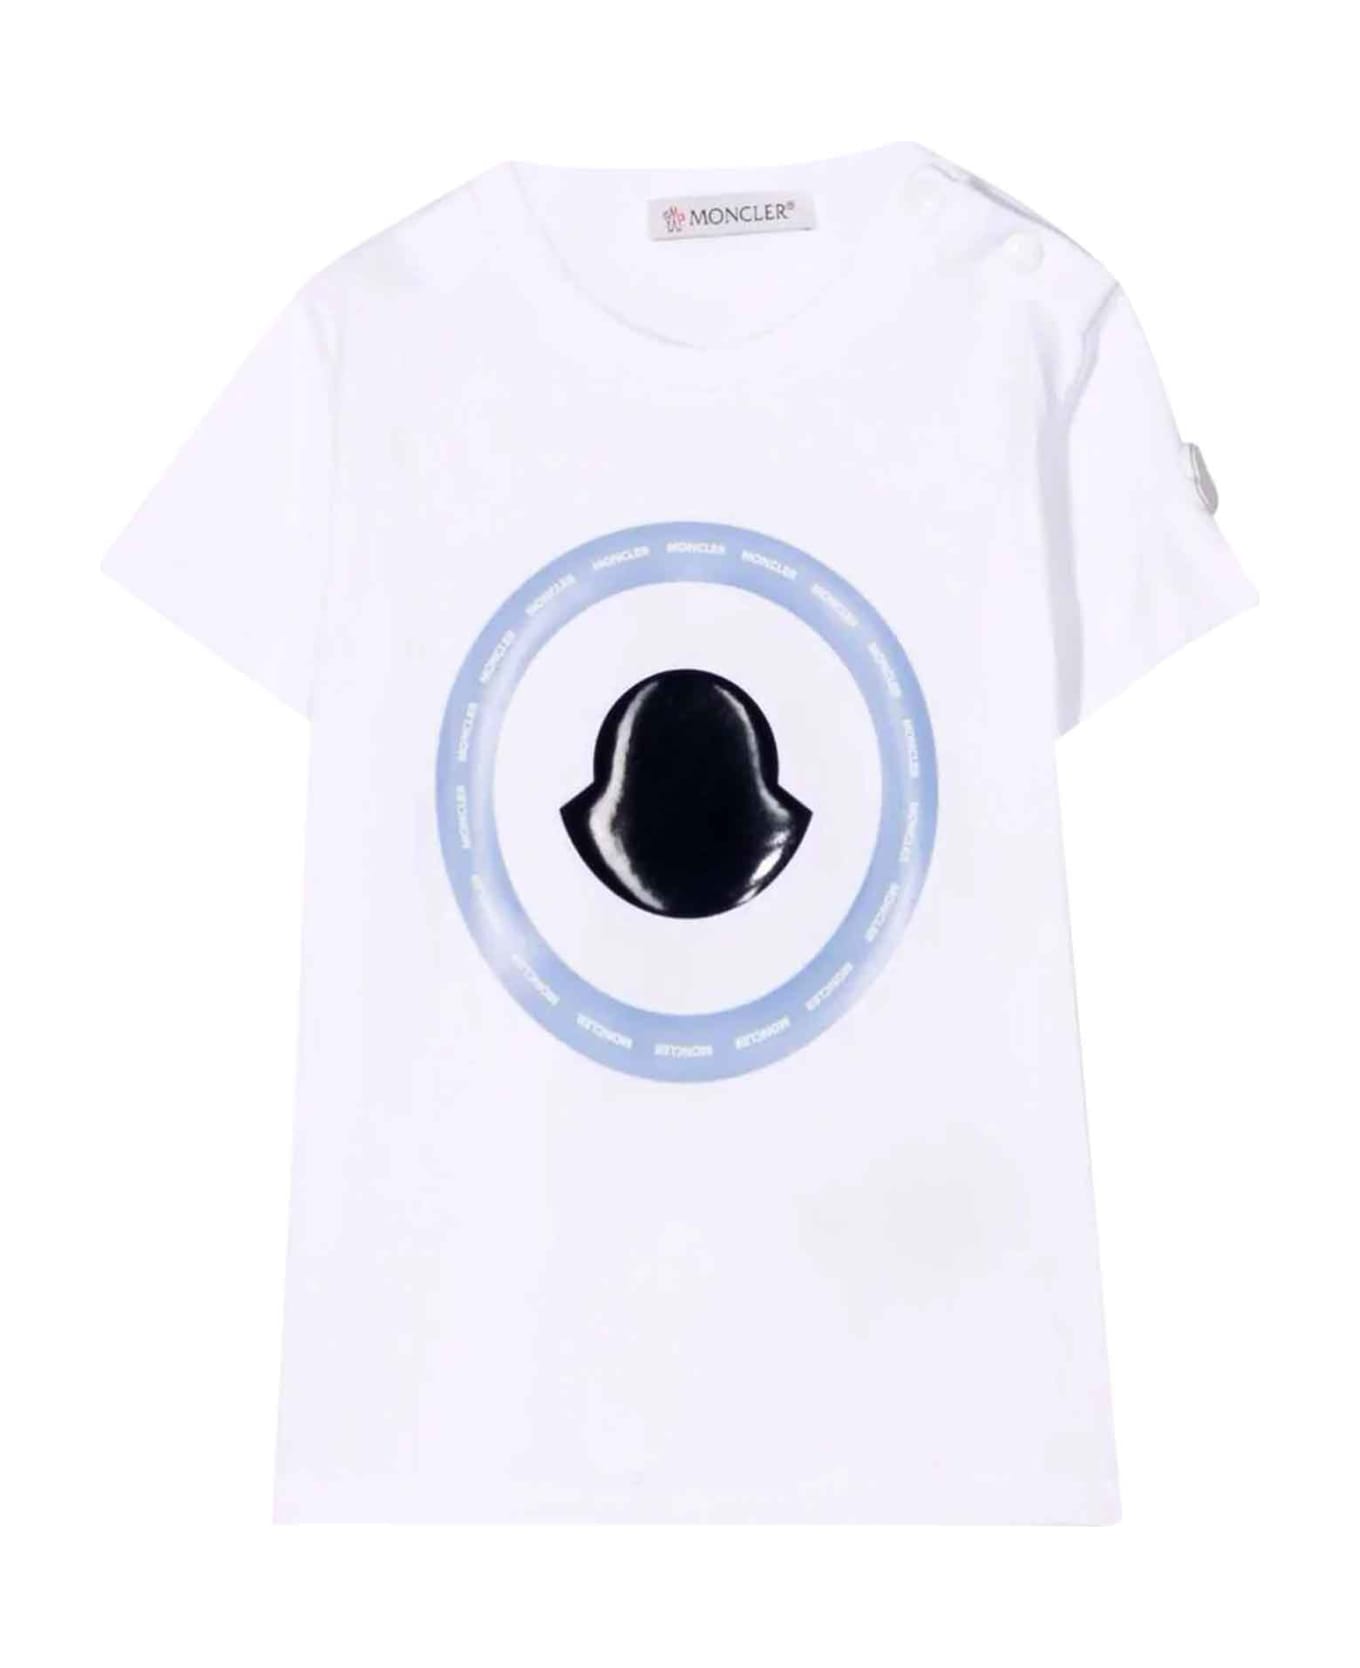 Moncler White T-shirt With Print - WHITE Tシャツ＆ポロシャツ